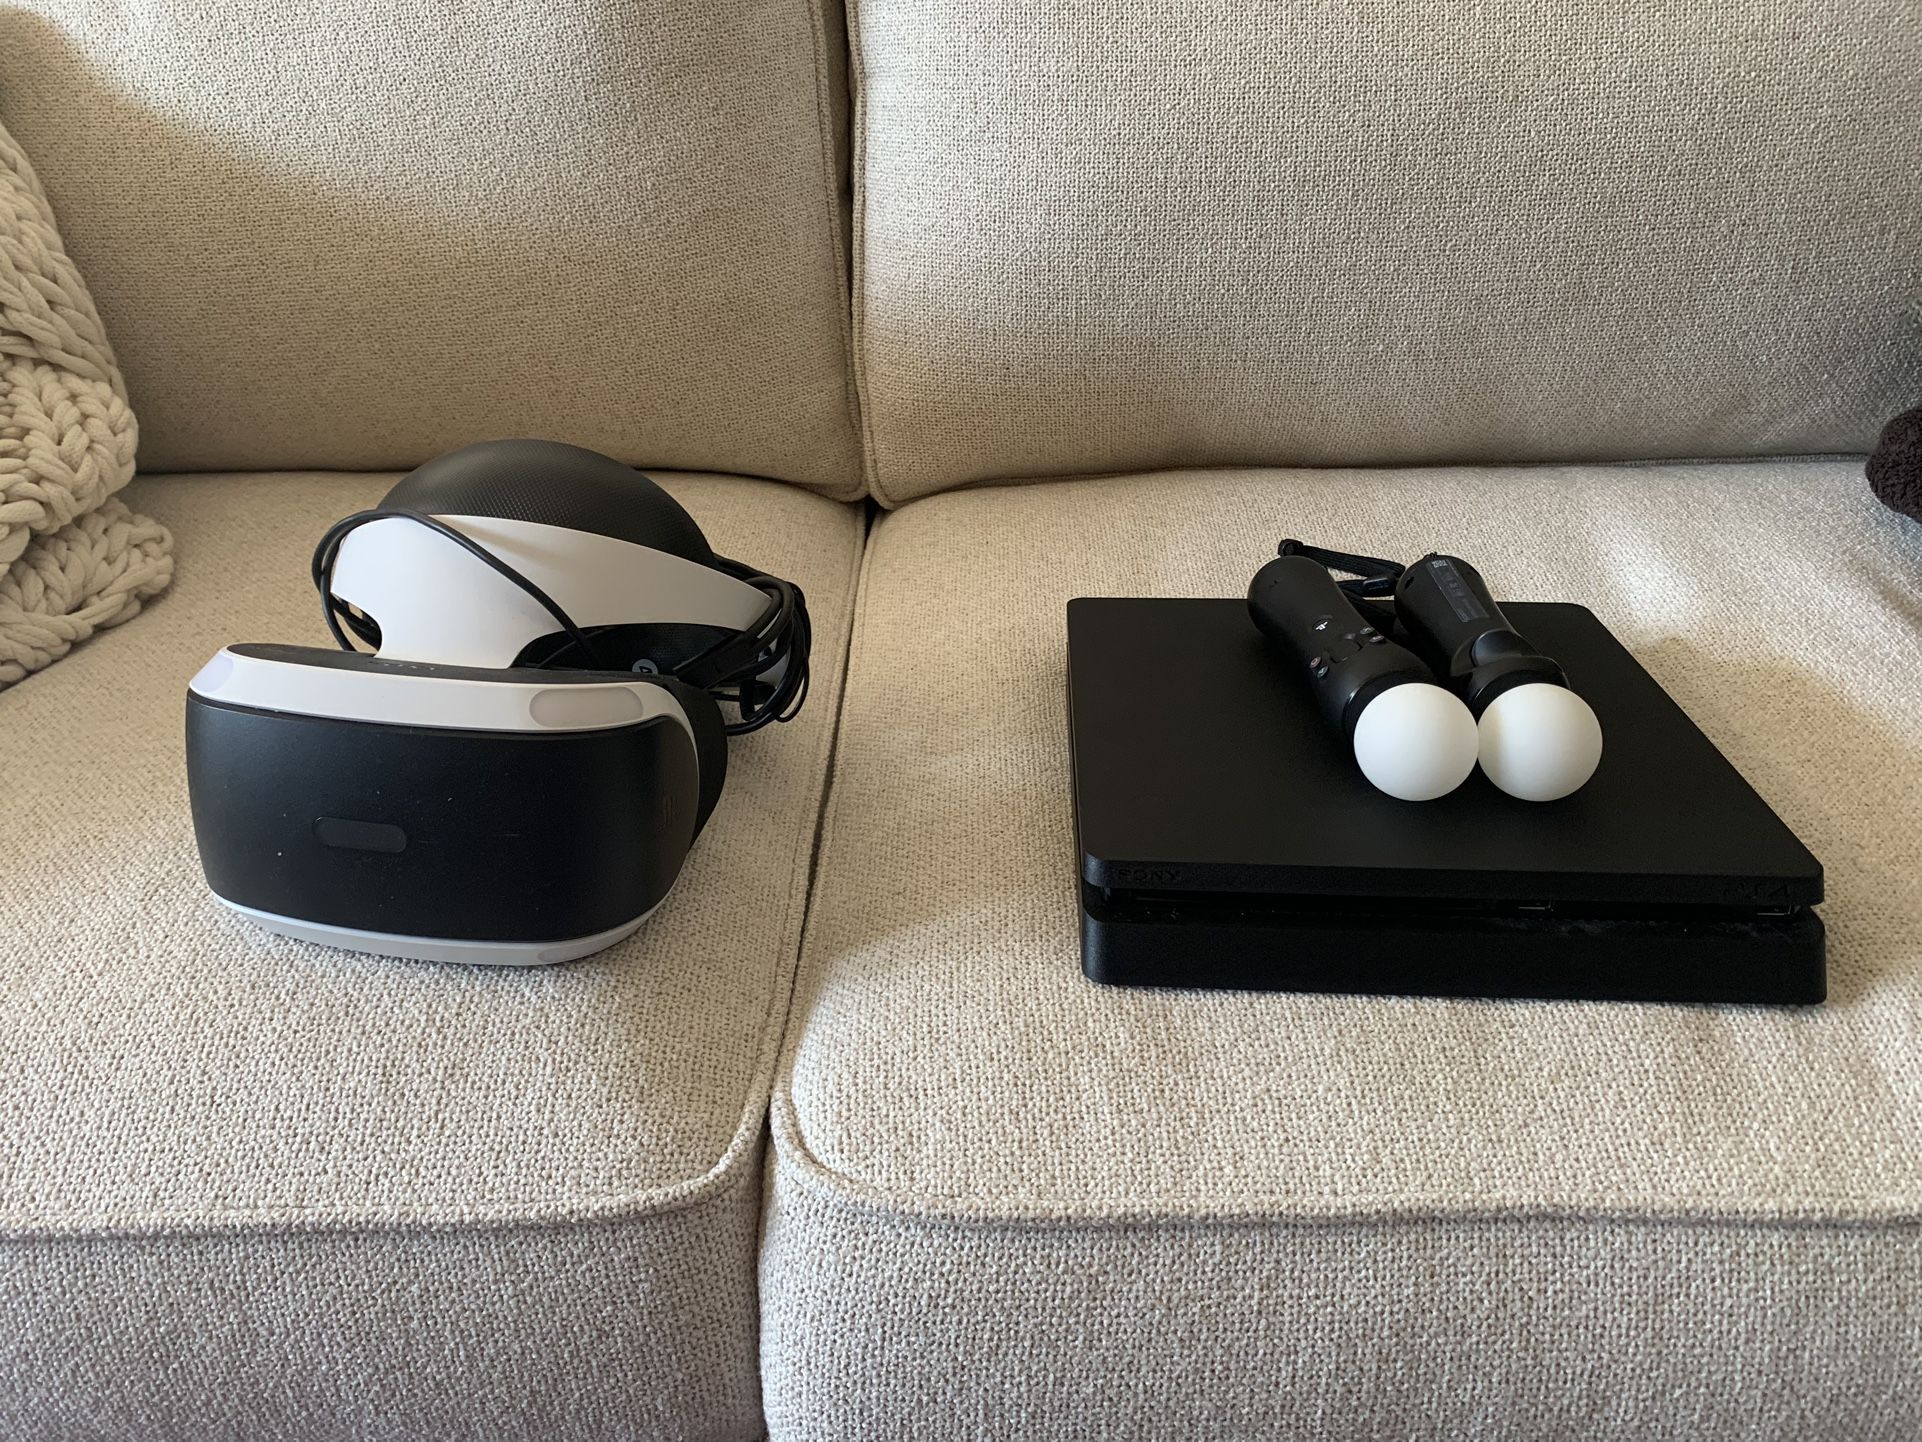 Sony Play Station With VR